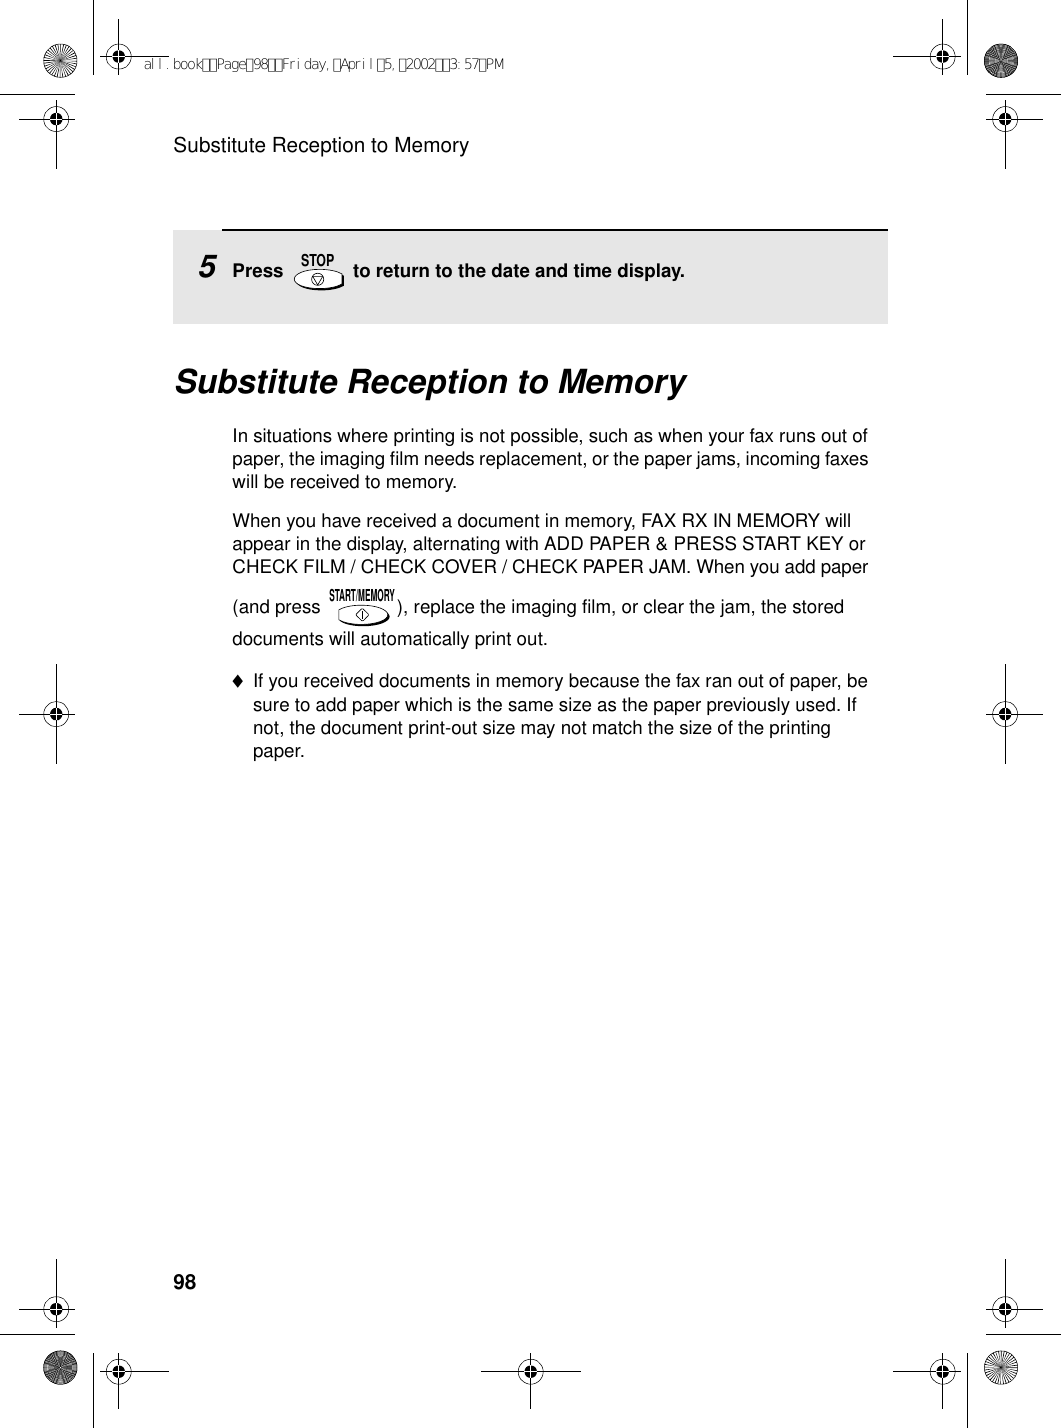 Substitute Reception to Memory98Substitute Reception to MemoryIn situations where printing is not possible, such as when your fax runs out of paper, the imaging film needs replacement, or the paper jams, incoming faxes will be received to memory.When you have received a document in memory, FAX RX IN MEMORY will appear in the display, alternating with ADD PAPER &amp; PRESS START KEY or CHECK FILM / CHECK COVER / CHECK PAPER JAM. When you add paper (and press  ), replace the imaging film, or clear the jam, the stored documents will automatically print out.♦If you received documents in memory because the fax ran out of paper, be sure to add paper which is the same size as the paper previously used. If not, the document print-out size may not match the size of the printing paper.START/MEMORY5Press   to return to the date and time display.STOPall.bookPage98Friday,April5,20023:57PM